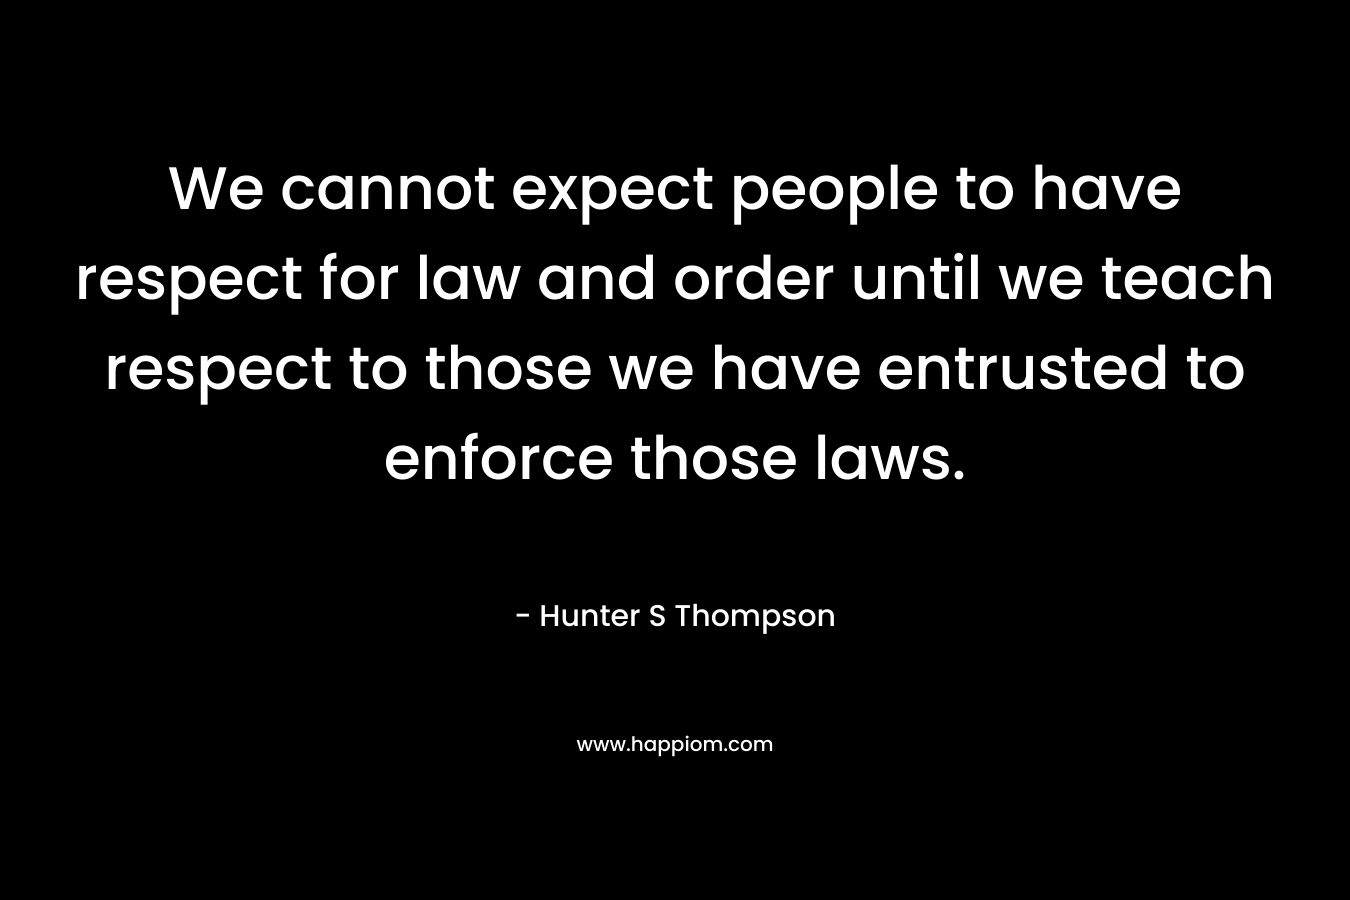 We cannot expect people to have respect for law and order until we teach respect to those we have entrusted to enforce those laws.